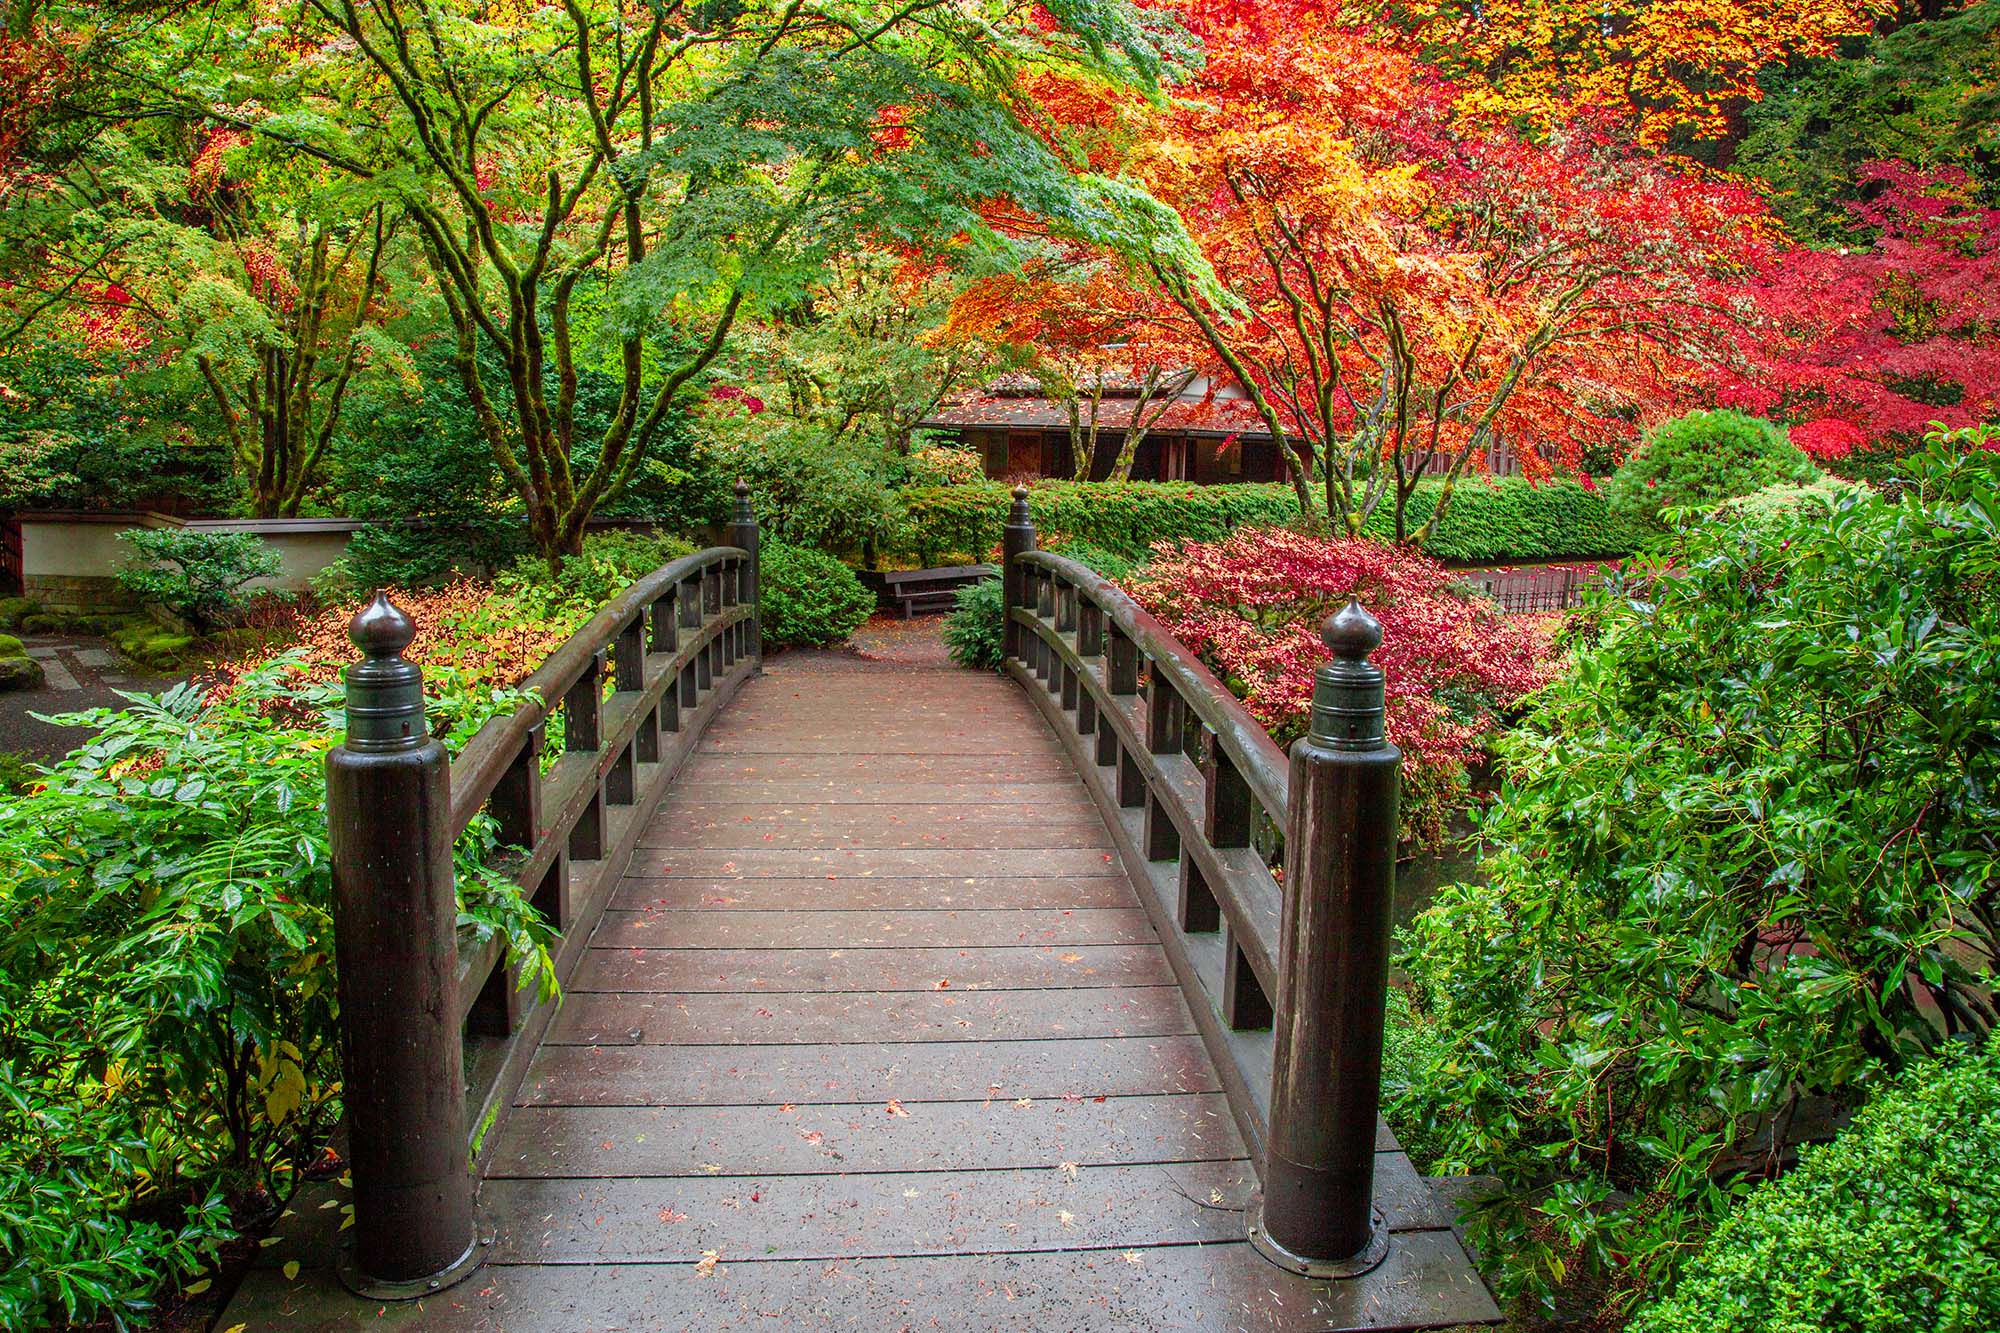 As we stand on the threshold of a wooden bridge in the Portland Japanese Garden, a vibrant world awaits us. The bridge leads...